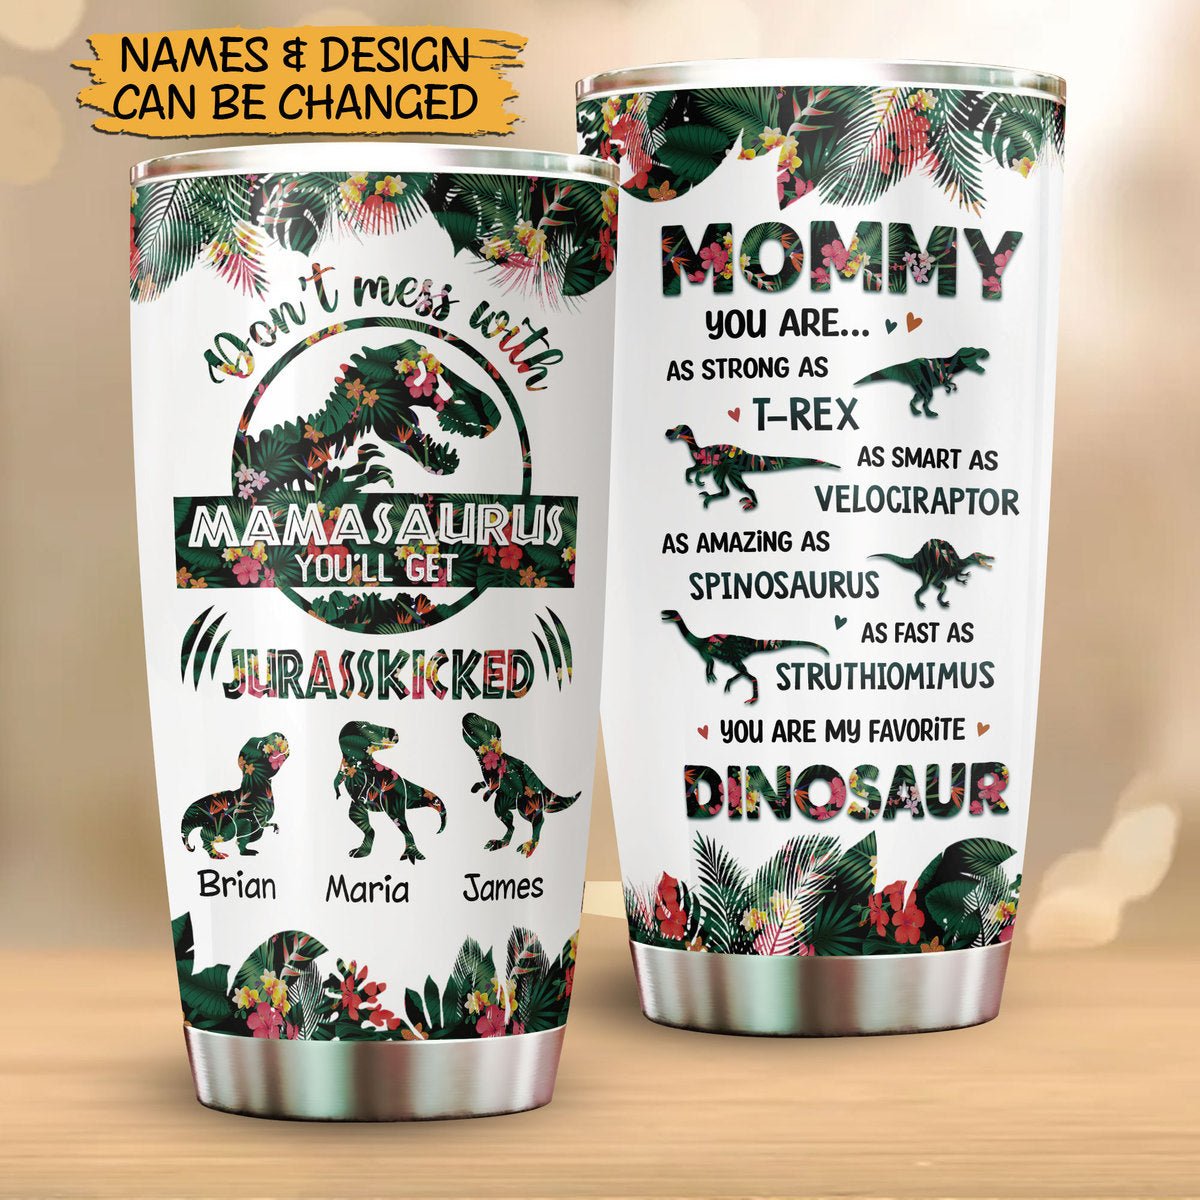 Personalized Tumbler For Mom - Pink Tropical Mamasaurus Tumbler